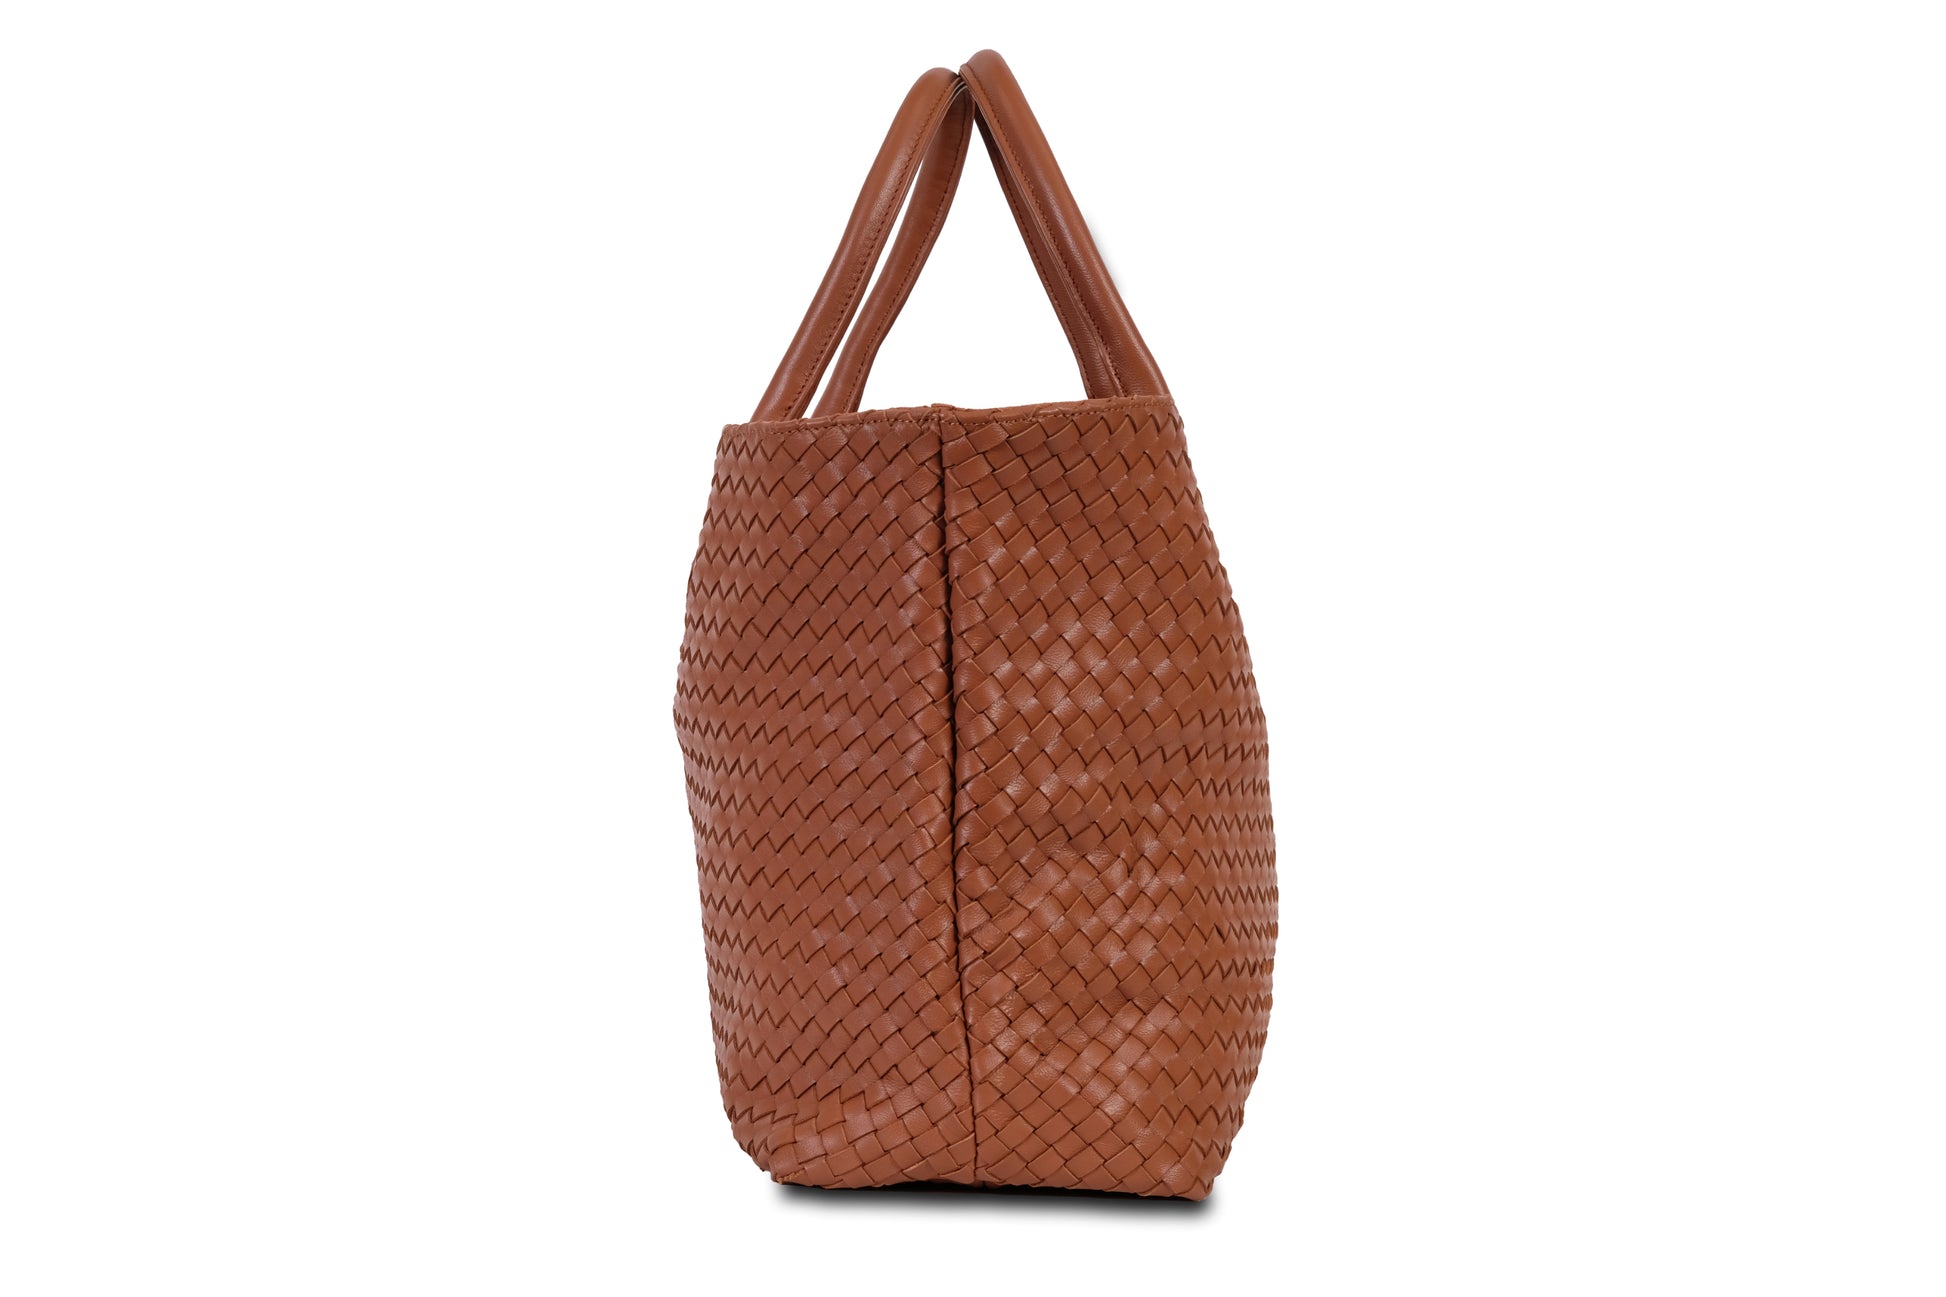 Destarina Coffee Brown Crosshatch Leather Tote Bag Handbag made by Dewi Maya side view available at the best boutique in Upstate South Carolina Spartanburg Greenville Dewi Maya Boutique